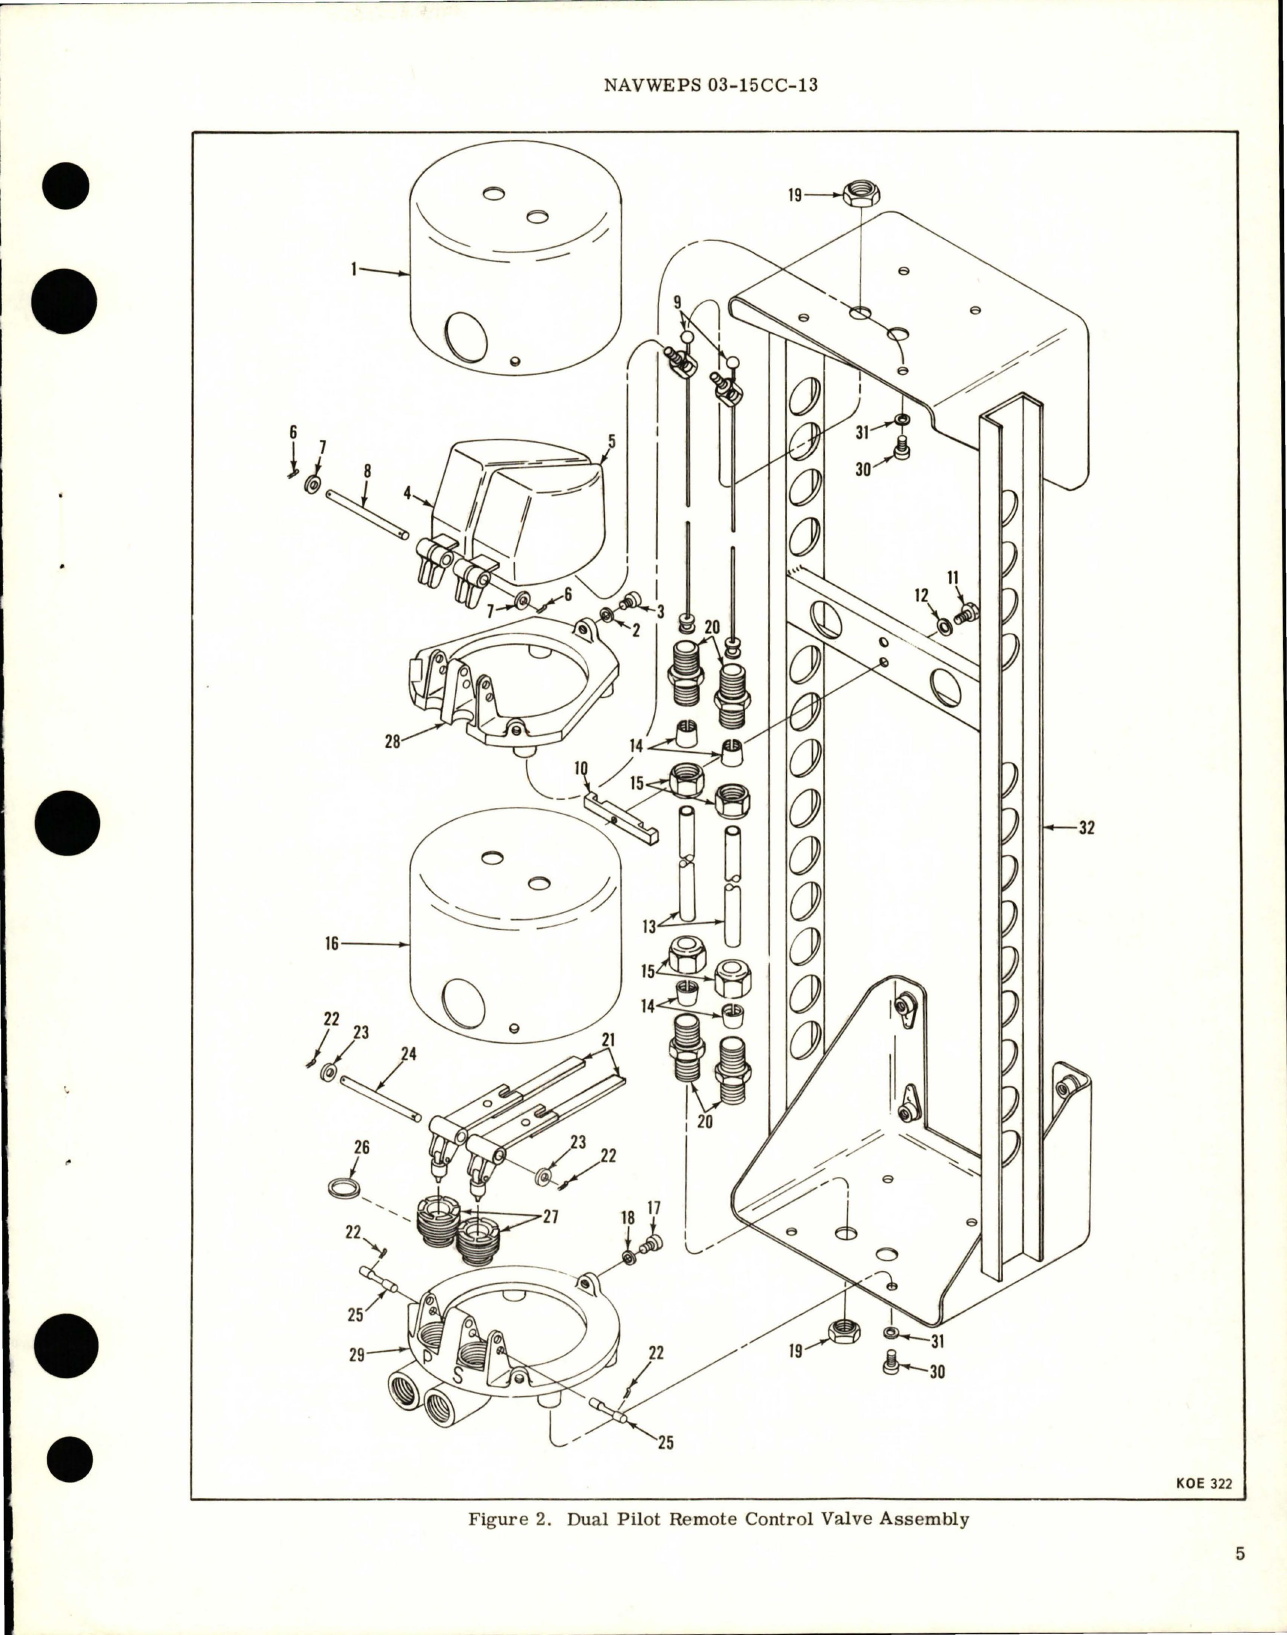 Sample page 5 from AirCorps Library document: Overhaul Instructions with Parts Breakdown for Dual Pilot Remote Control Valve - Parts 7-115115 and 7-115115-1